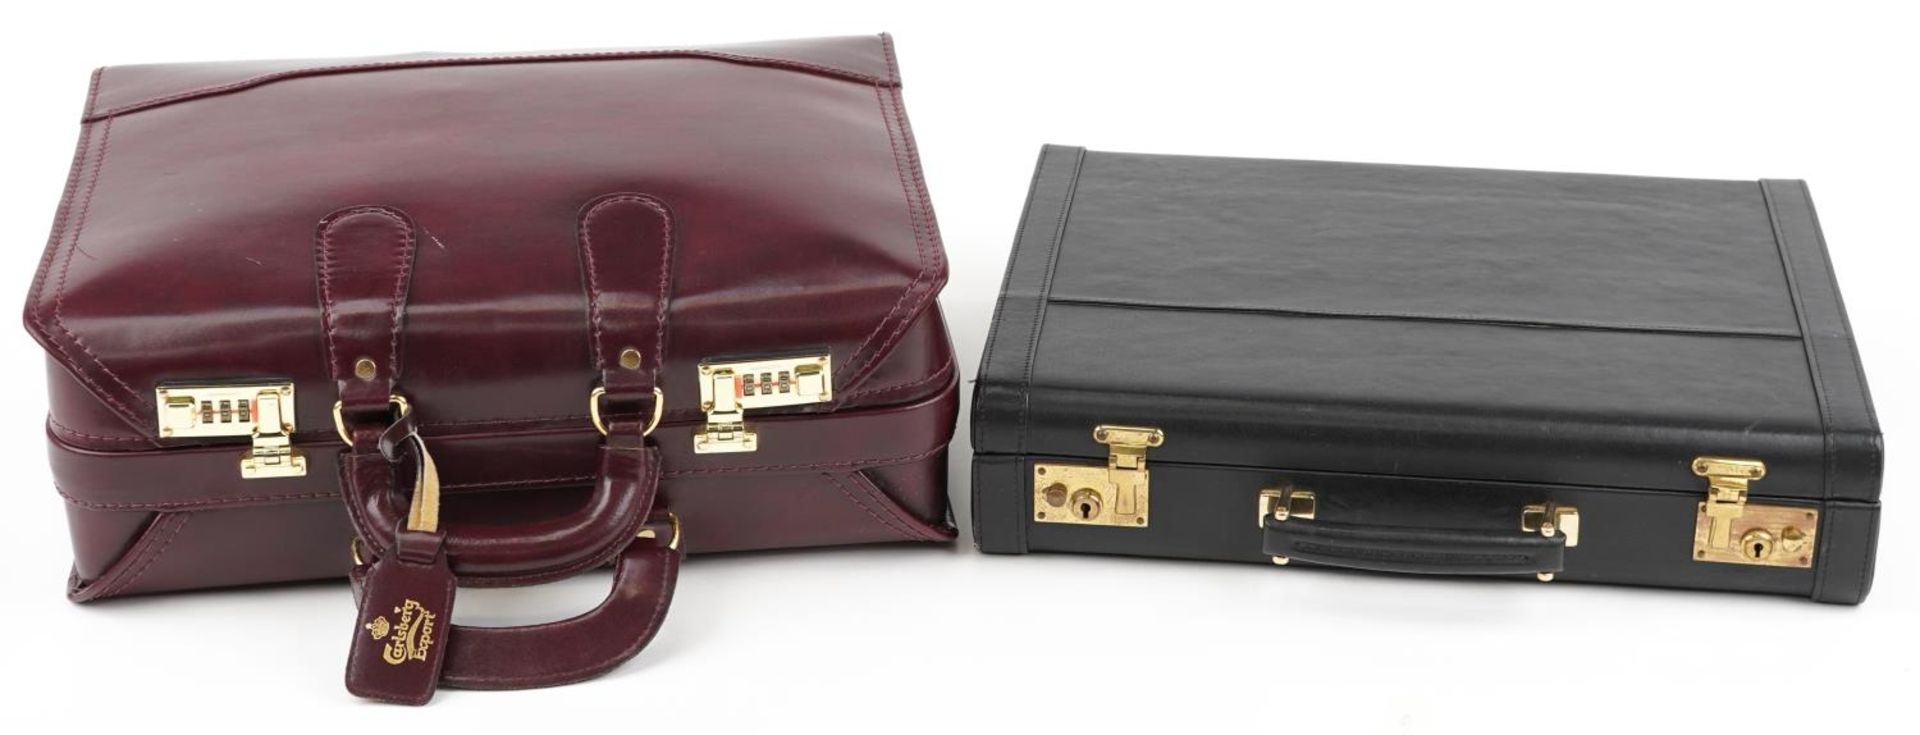 Two vintage leather briefcases including a breweriana interest custom Carlsberg Export burgundy